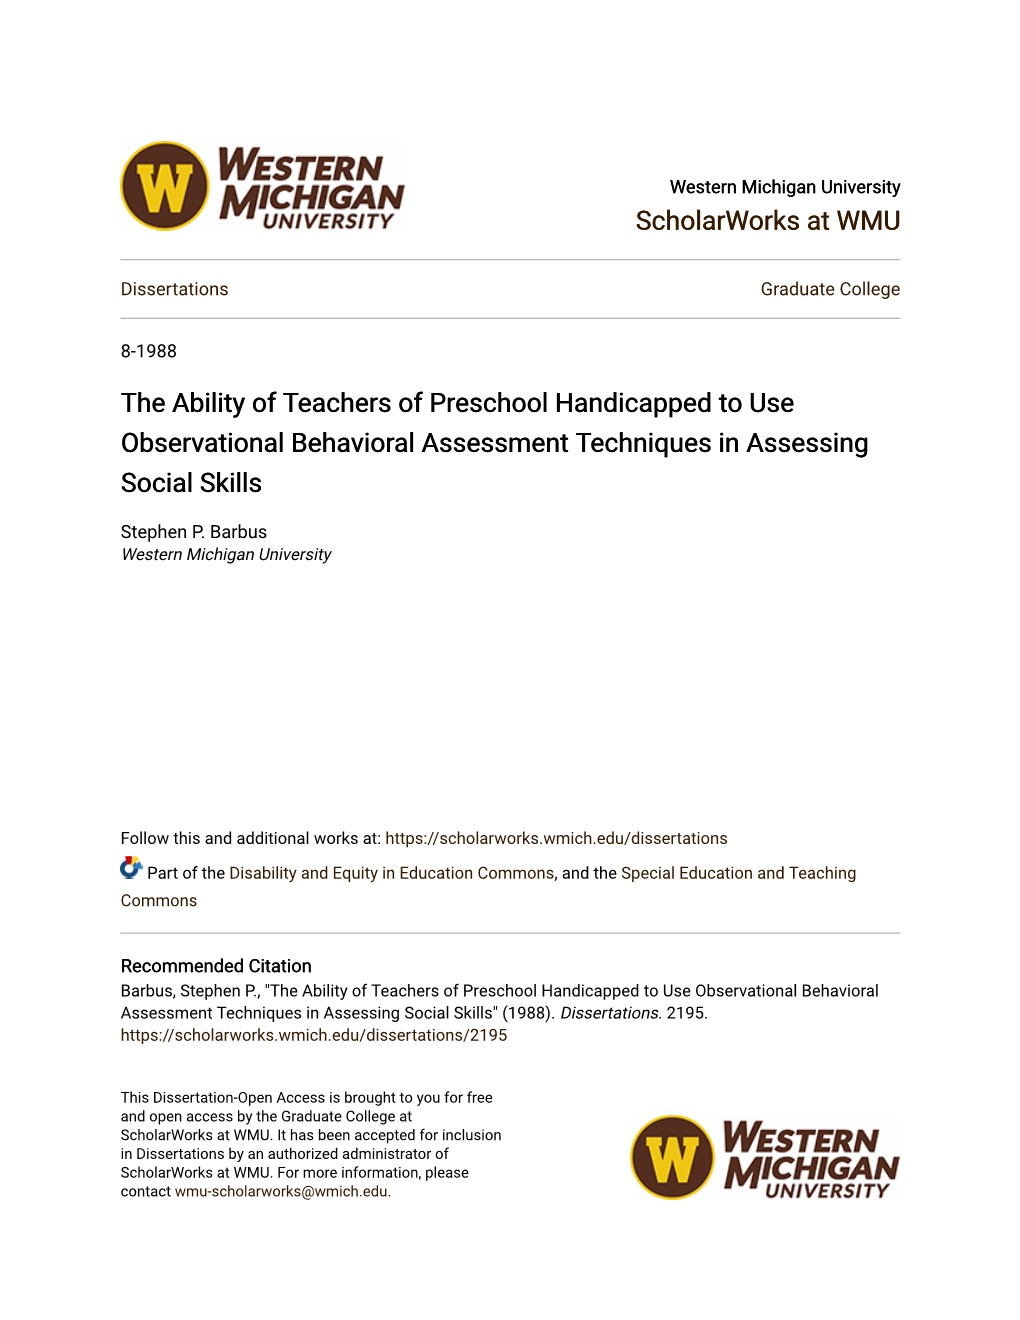 The Ability of Teachers of Preschool Handicapped to Use Observational Behavioral Assessment Techniques in Assessing Social Skills